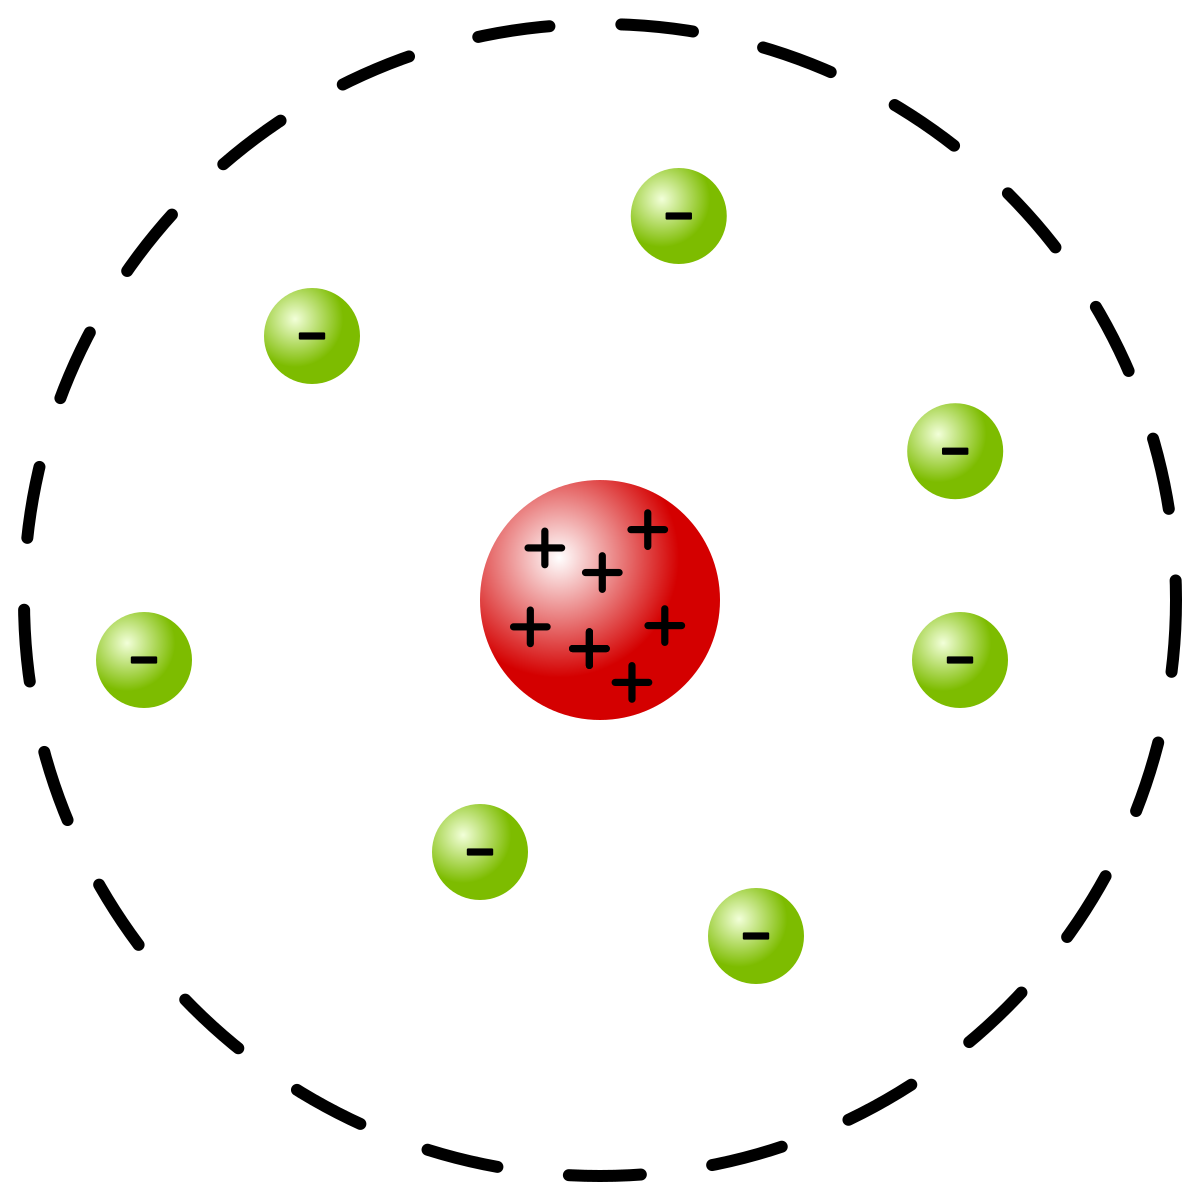 Rutherford atomic model